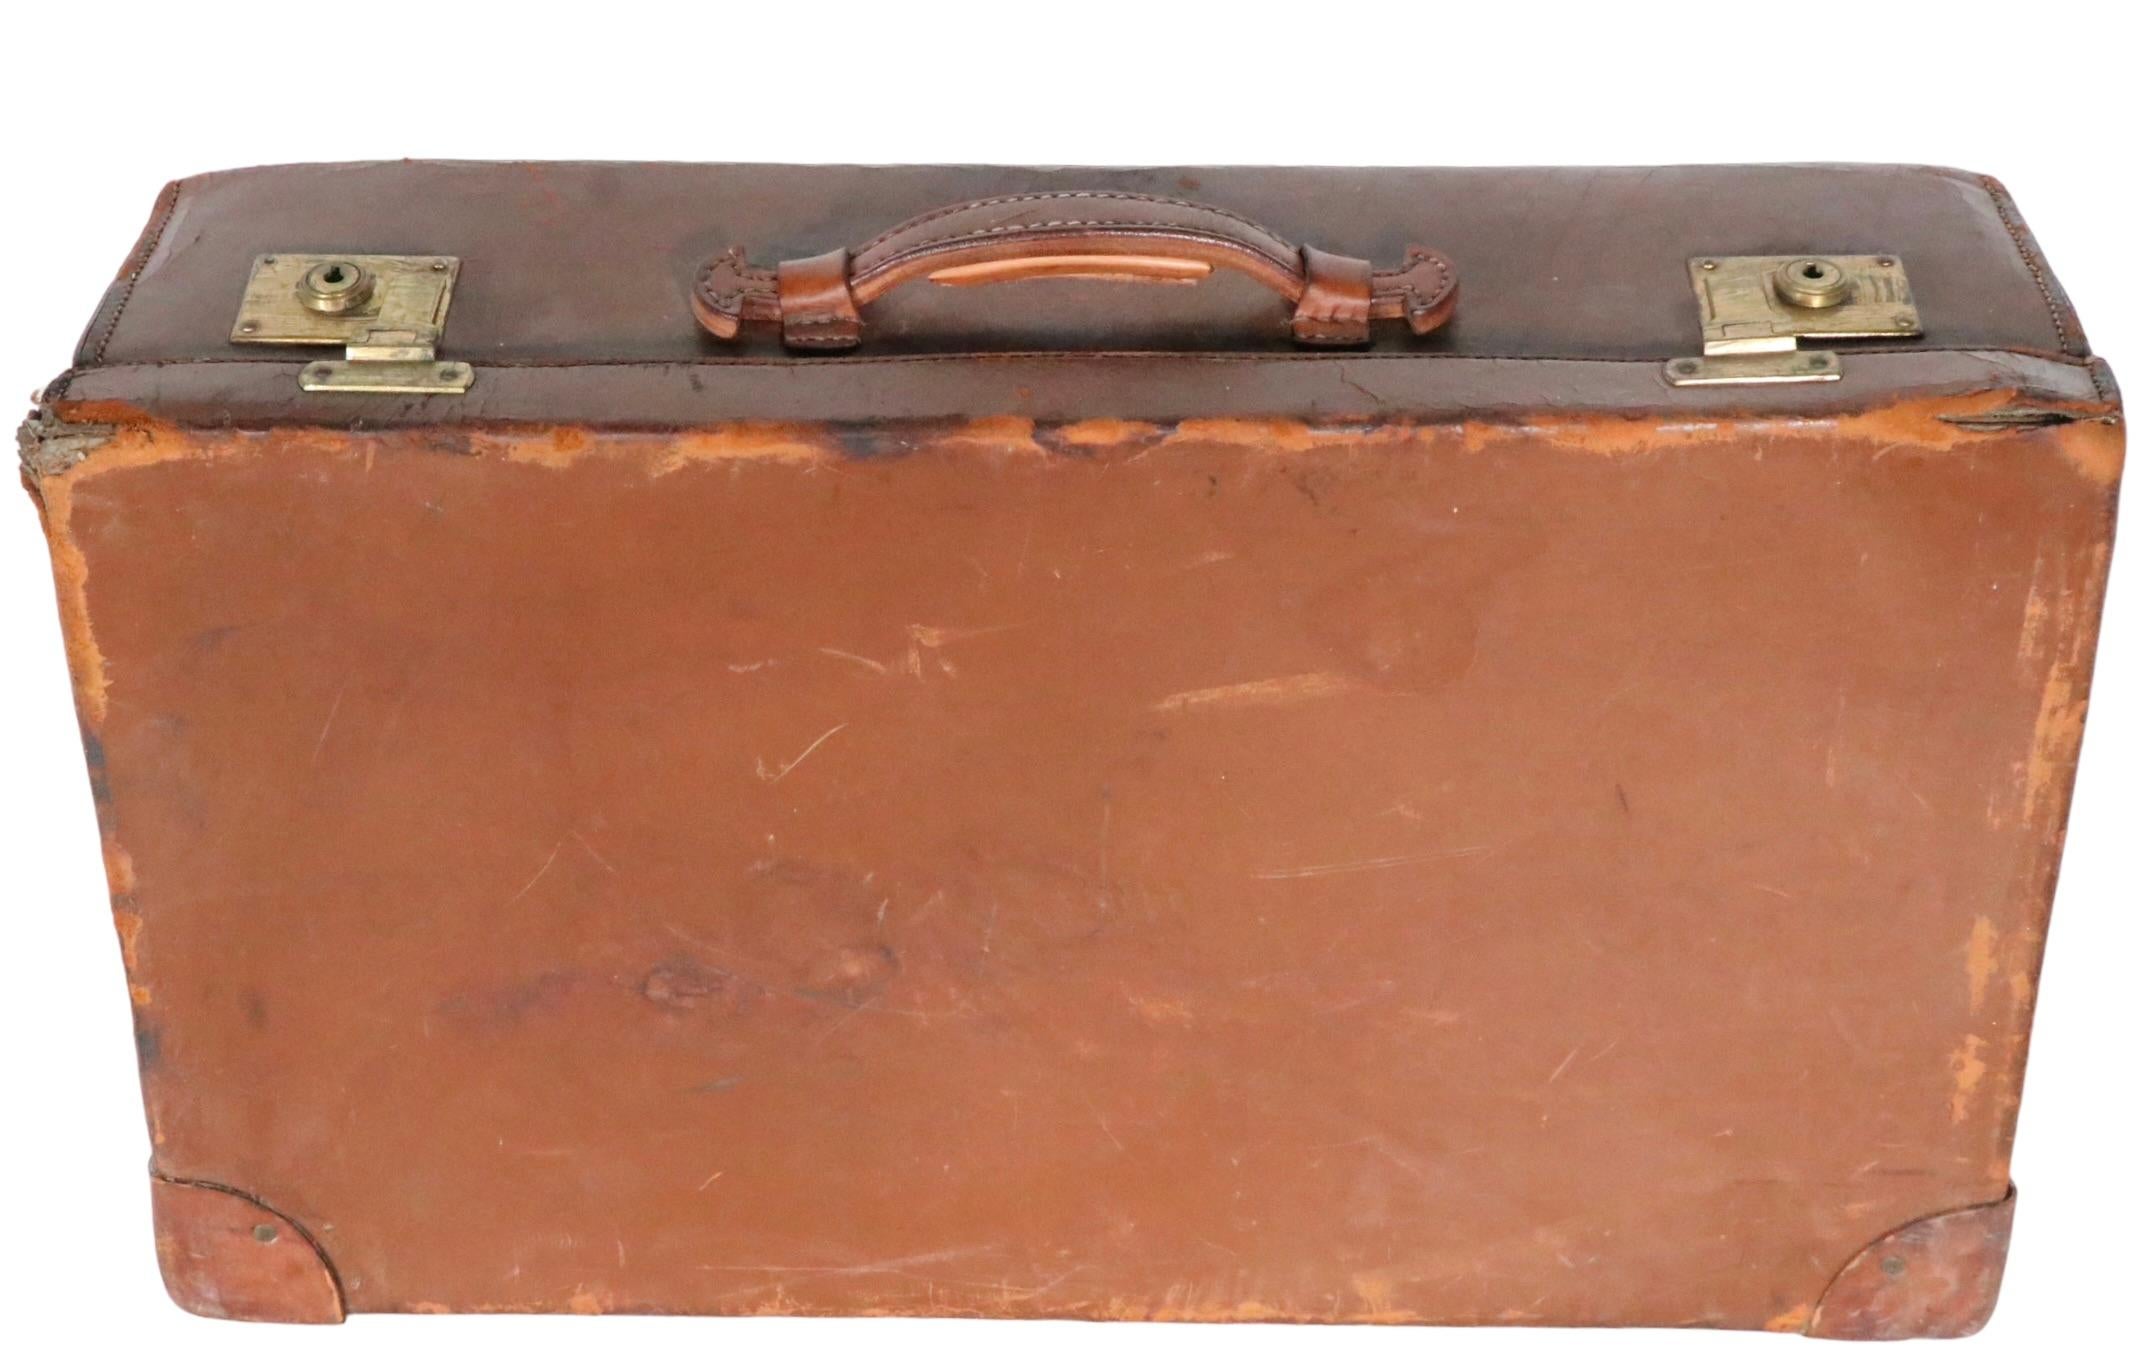 Vintage leather suitcase by noted American maker Crouch & Fitzgerald. The suitcase is in good, estate condition, it shows some signs of age and use, notable significant wear at two corners, please see images. It is marked with the makers table in